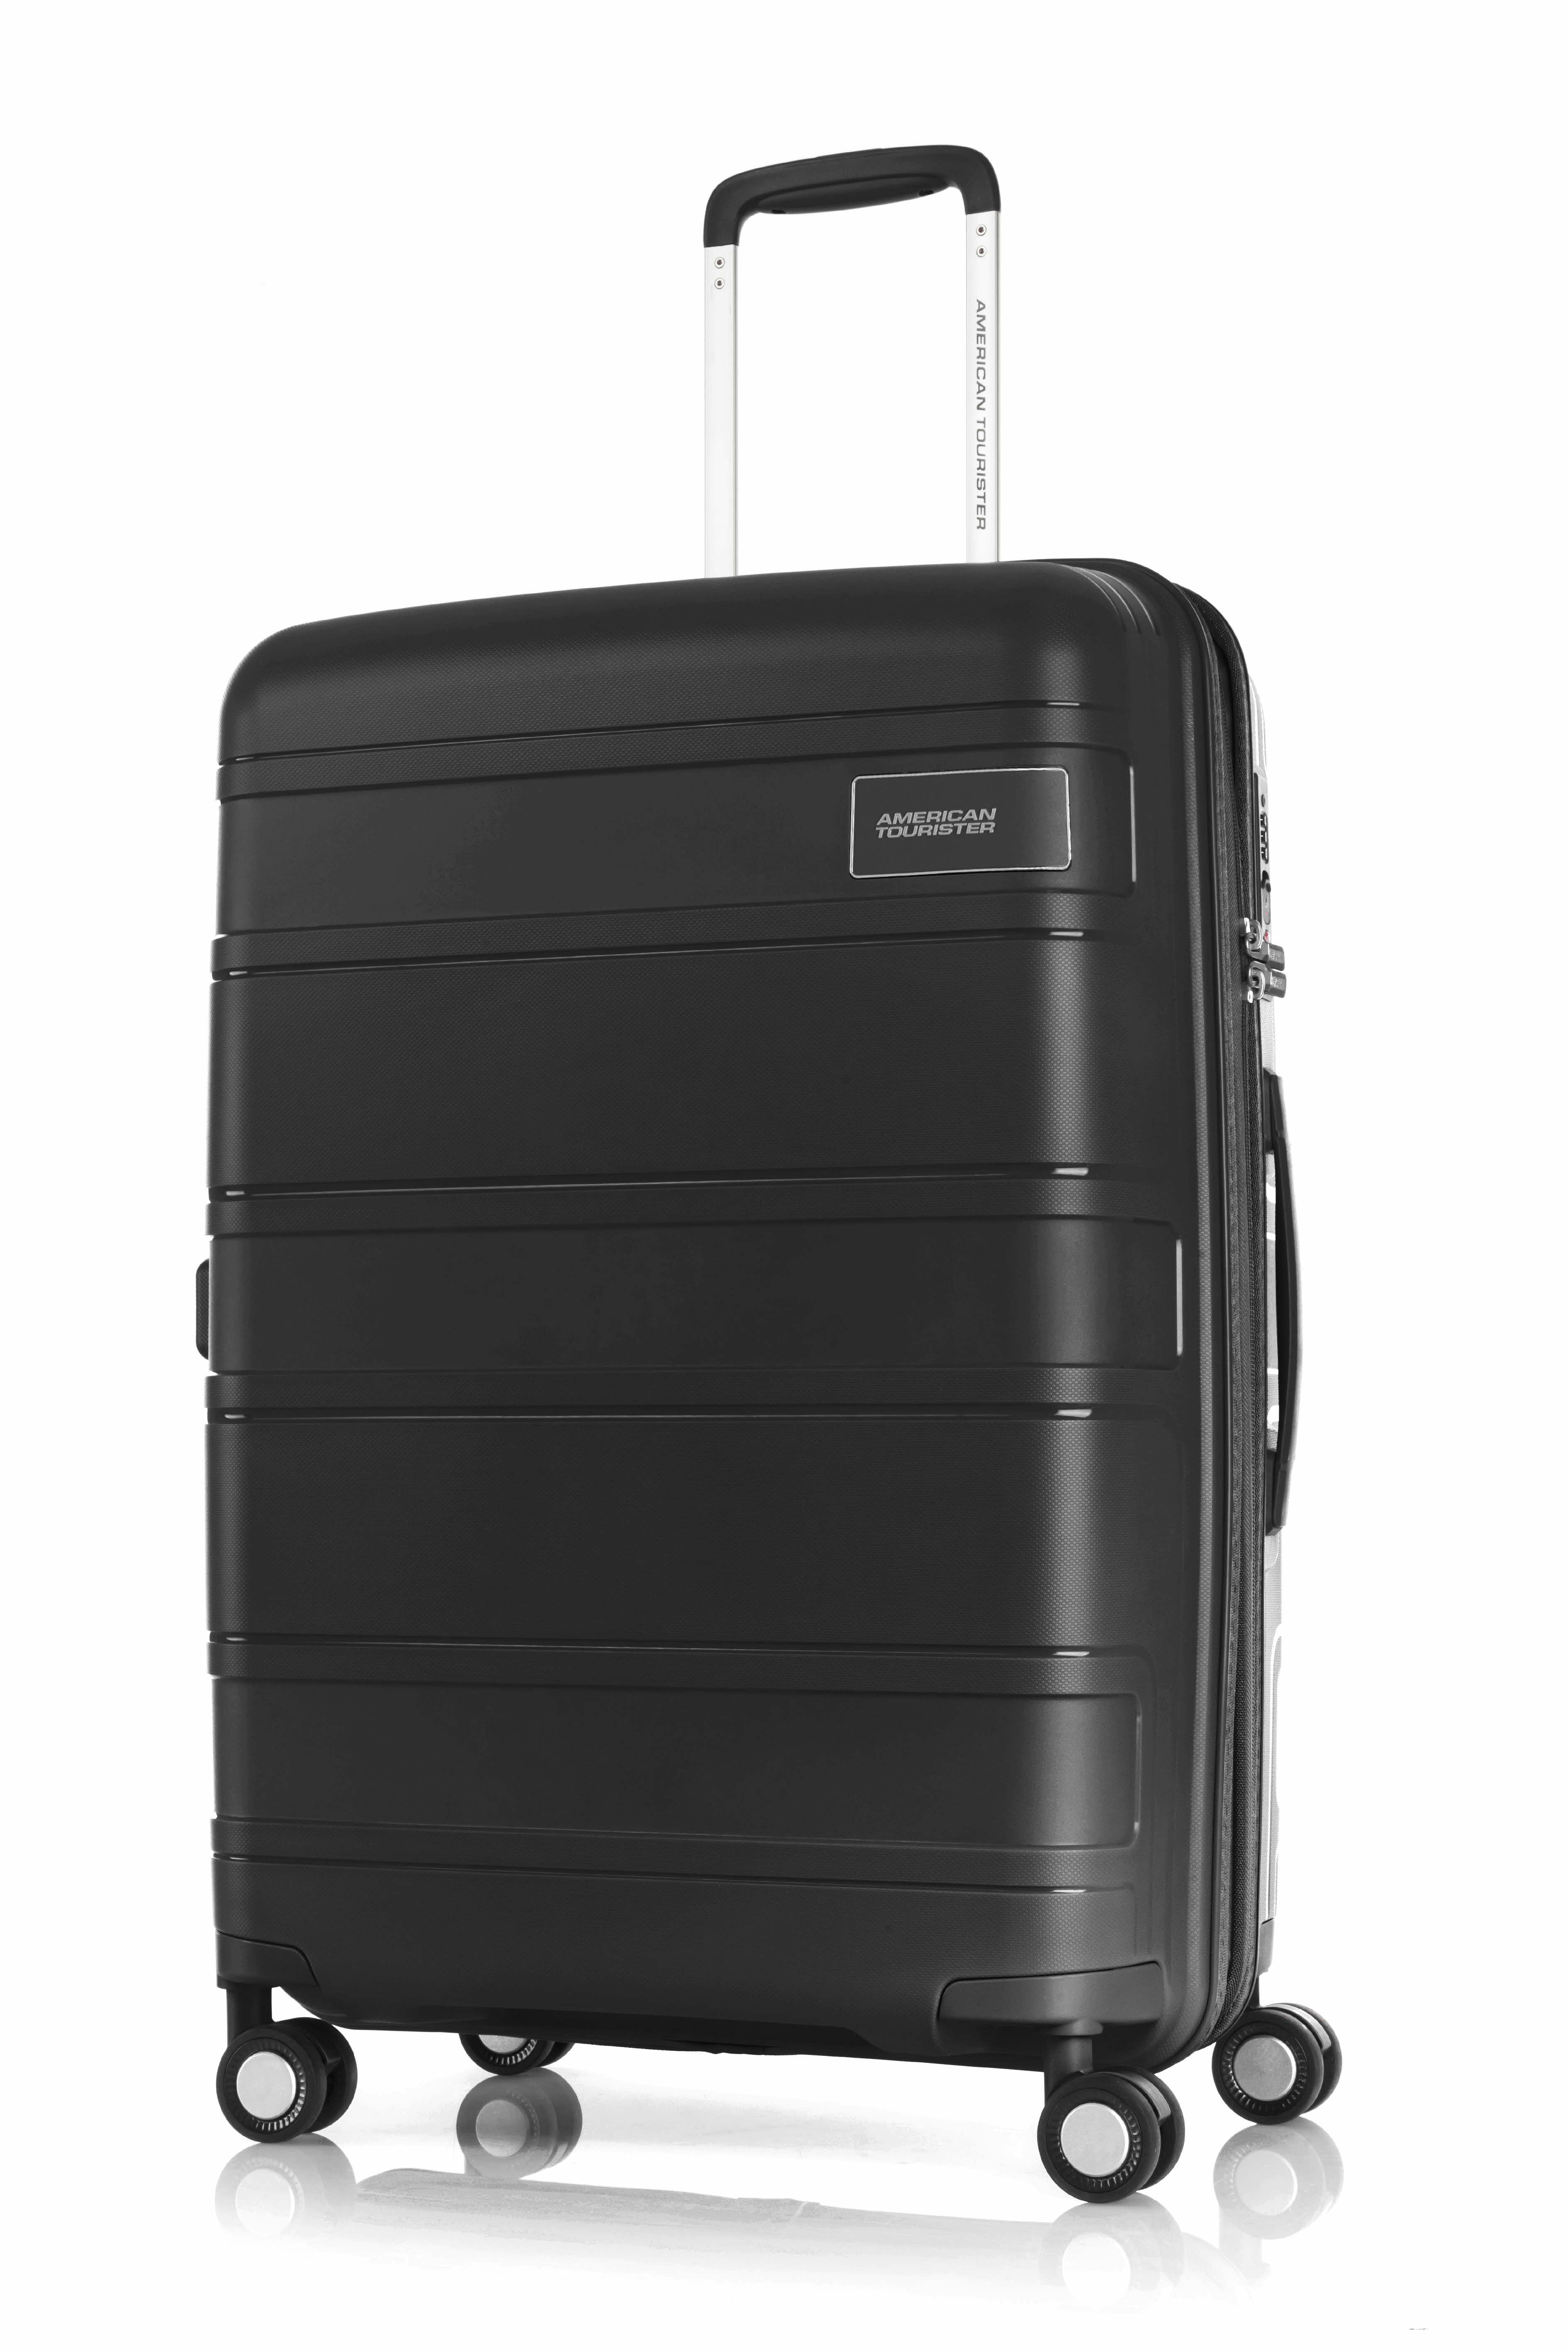 TravellerShield Plus Promotion American Tourister luggage